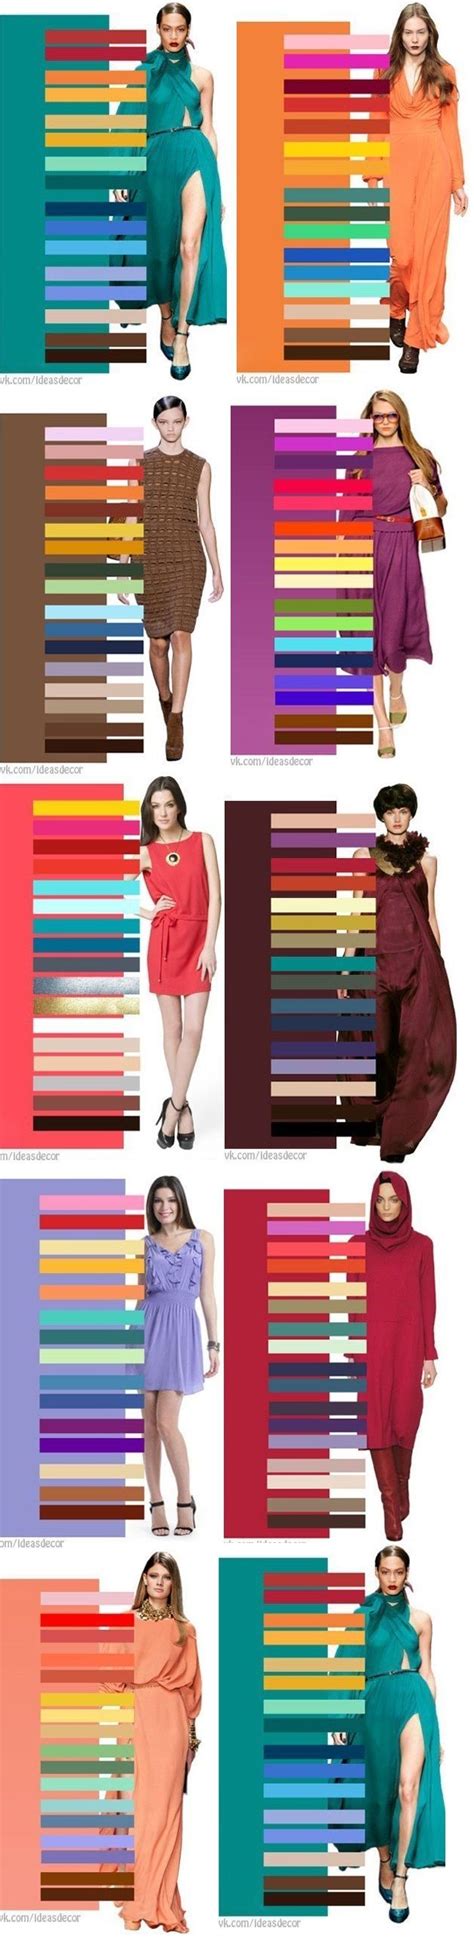 Great Color Combinations Interestingand Helpful For Those Like Me